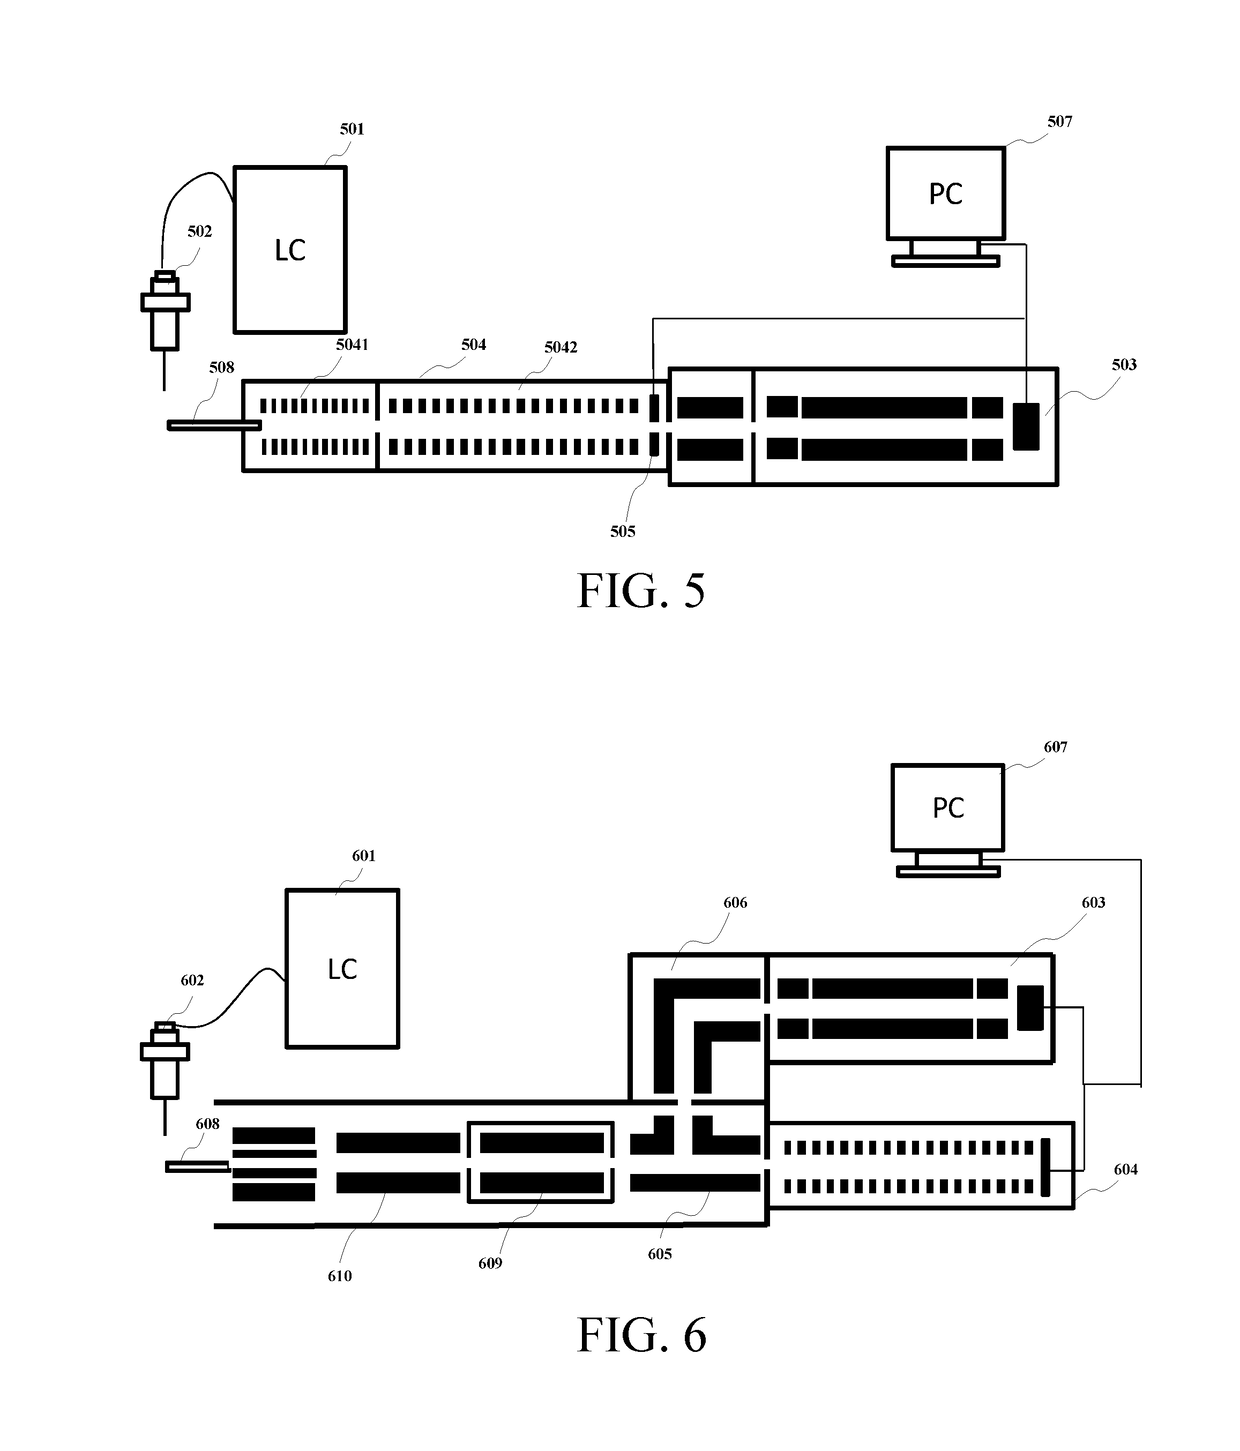 Methods and devices for parallel analysis of ion mobility spectrum and mass spectrum